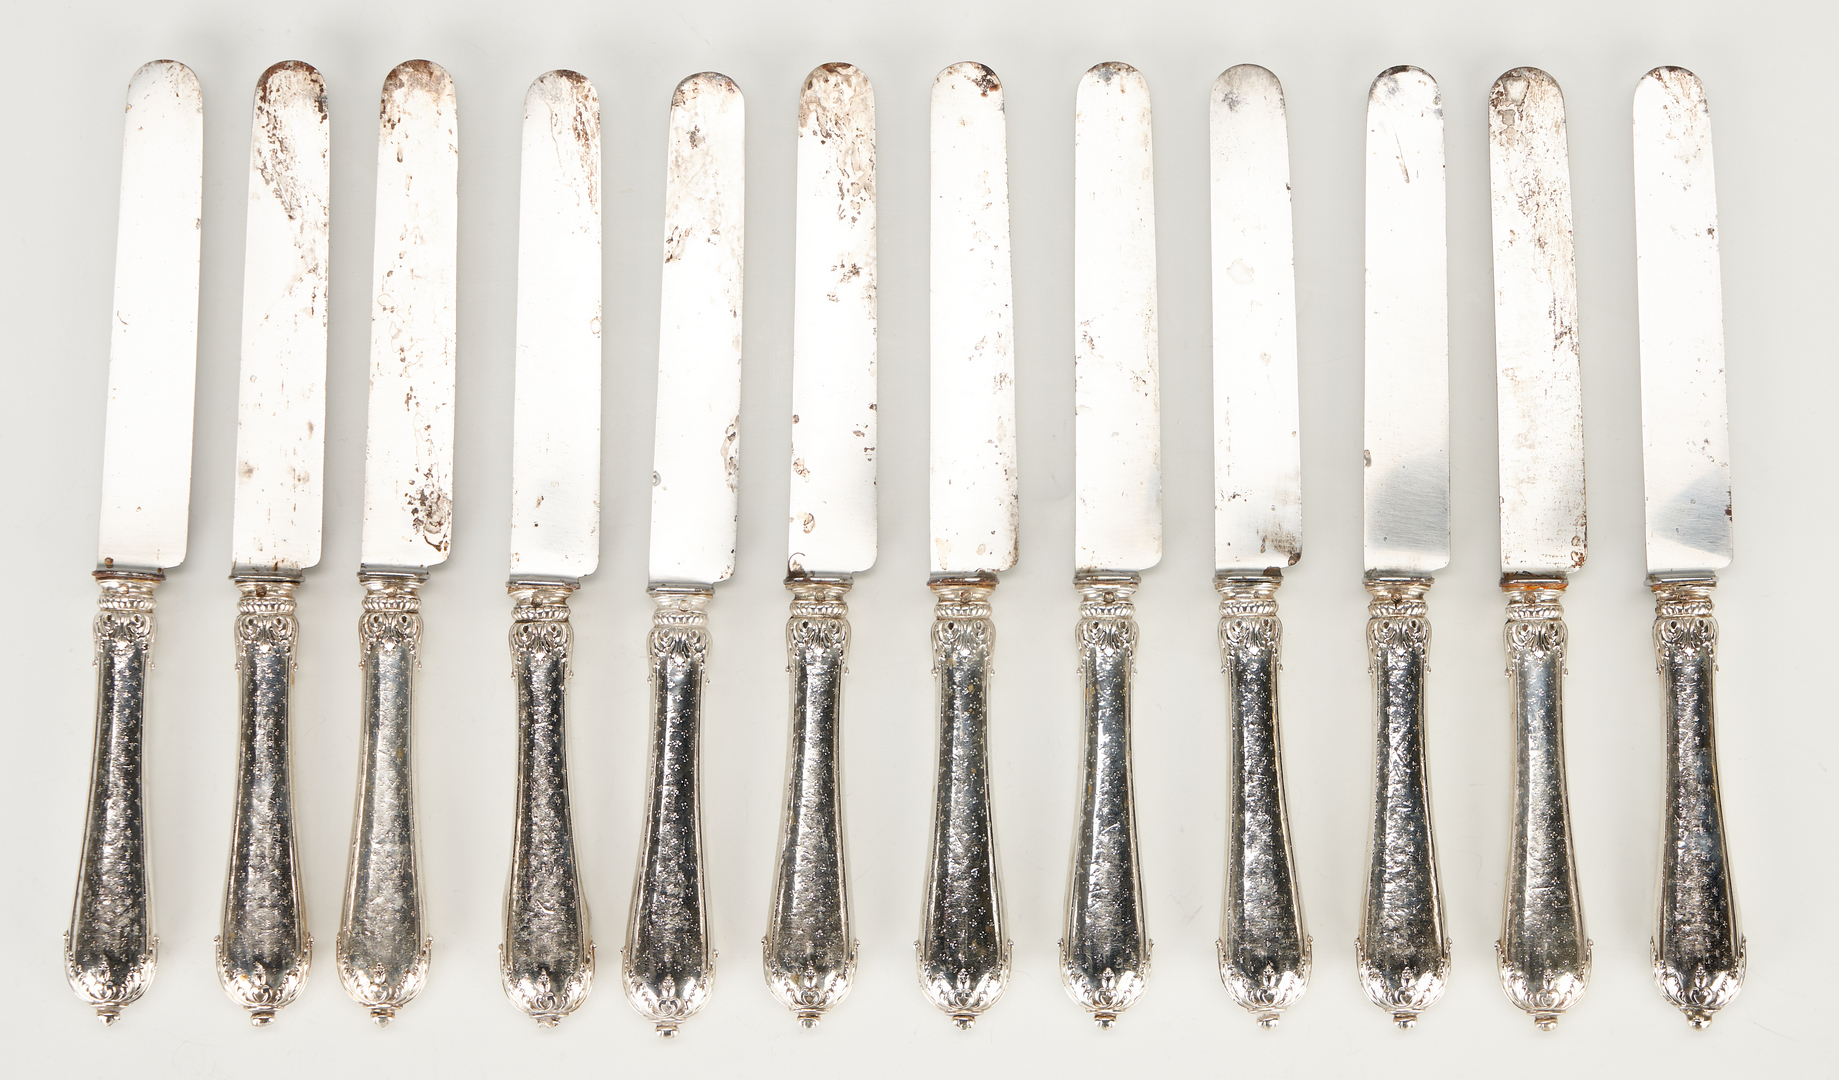 Lot 1163: 12 French Cased Silver Knives and 14 Napkin Rings